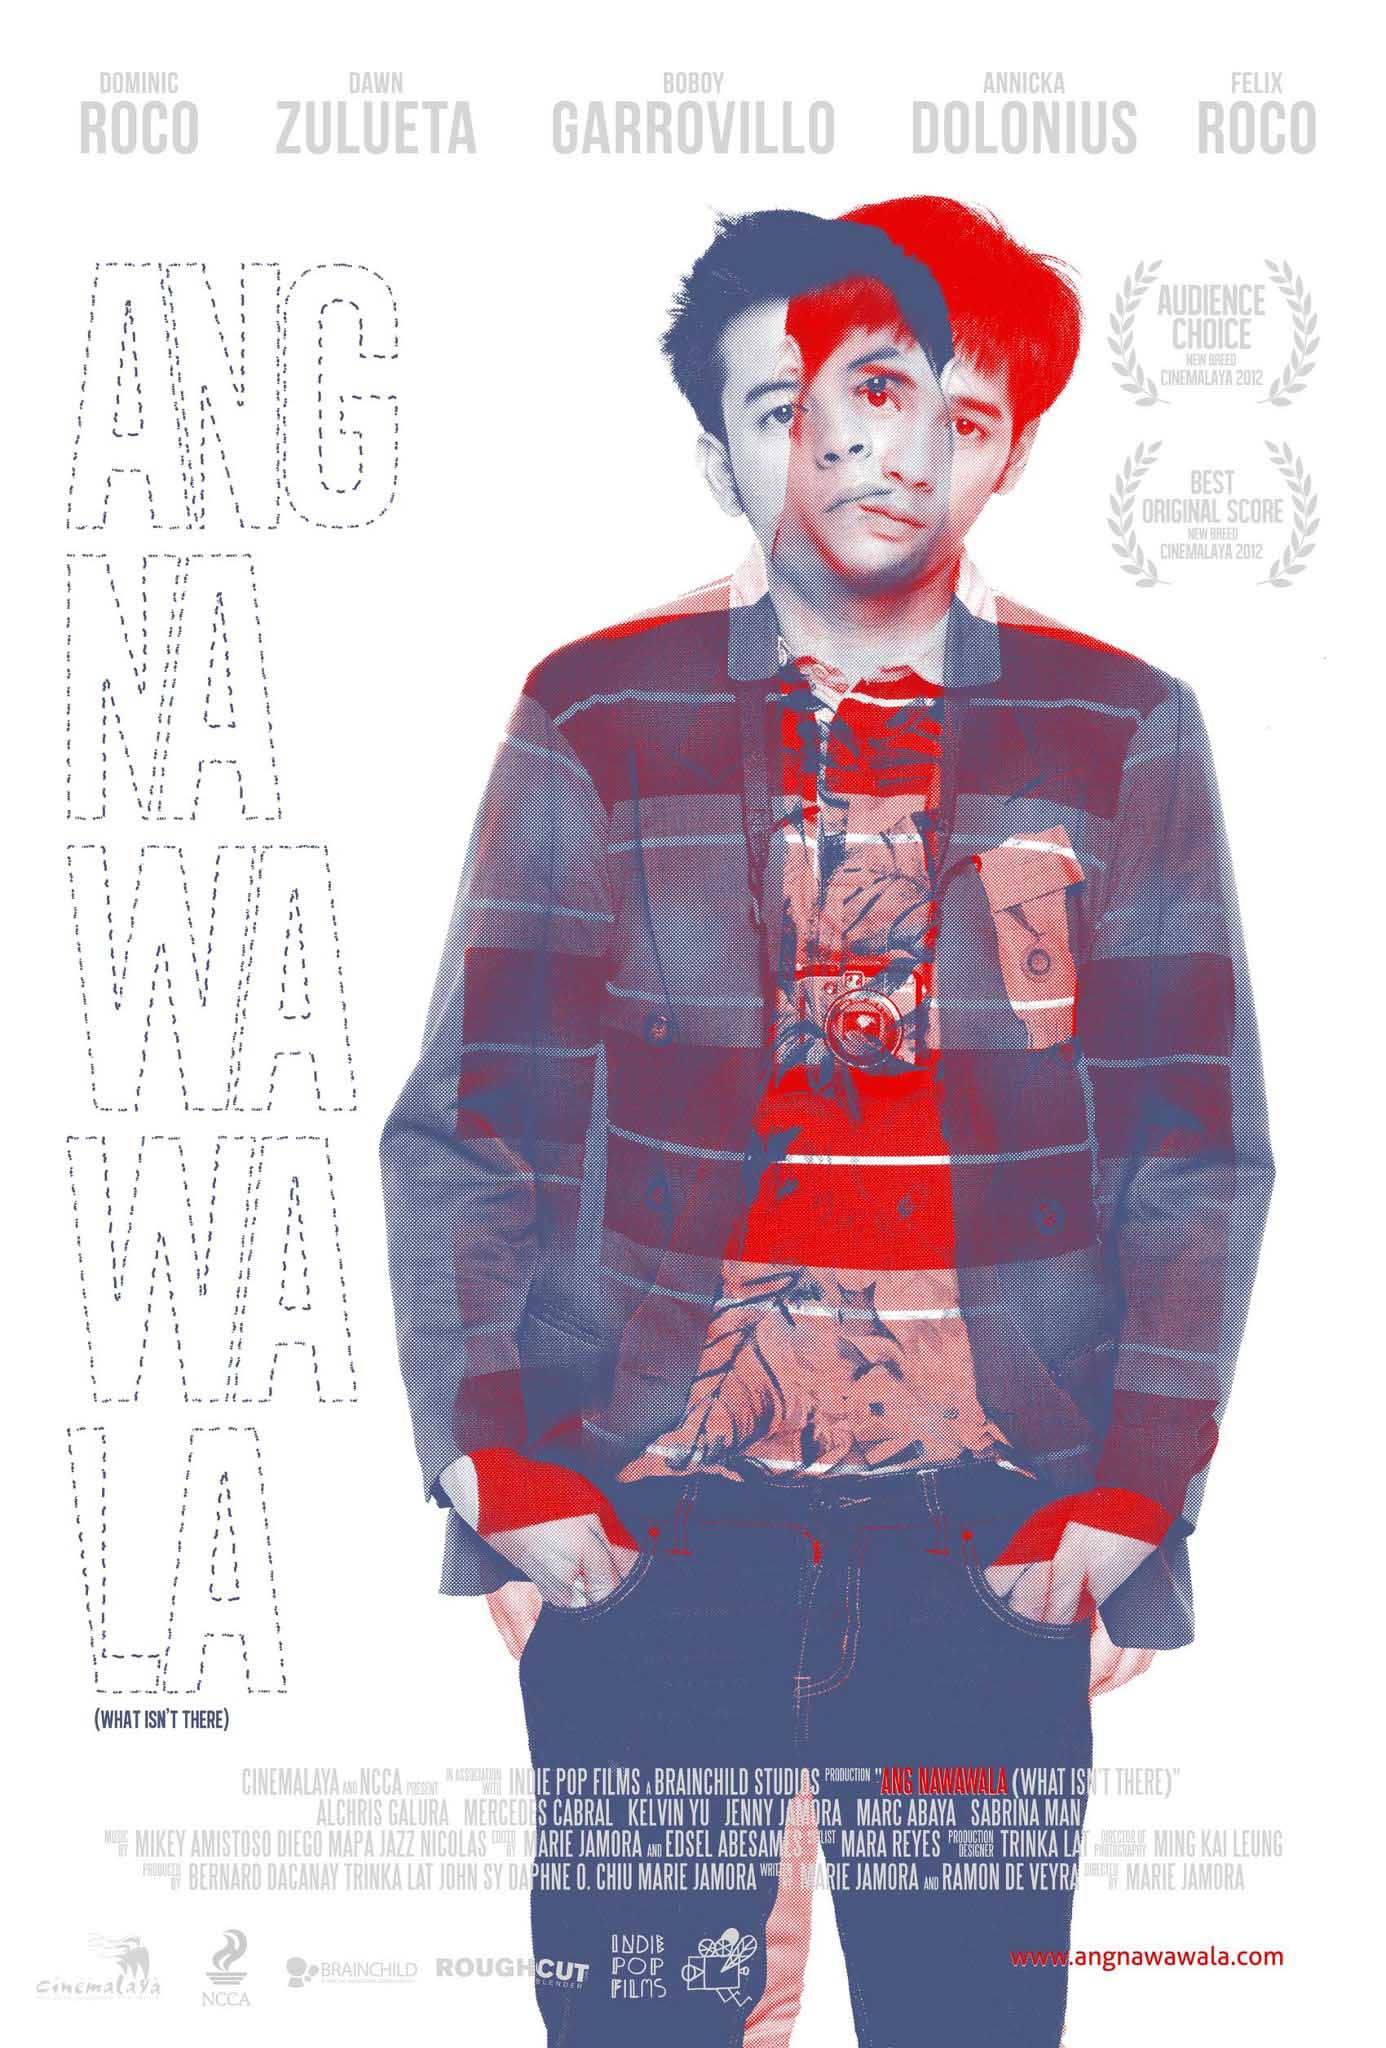 SUCH COOLNESS. Even Ang Nawawala’s poster is a keeper. Photo from the movie’s Facebook page. 